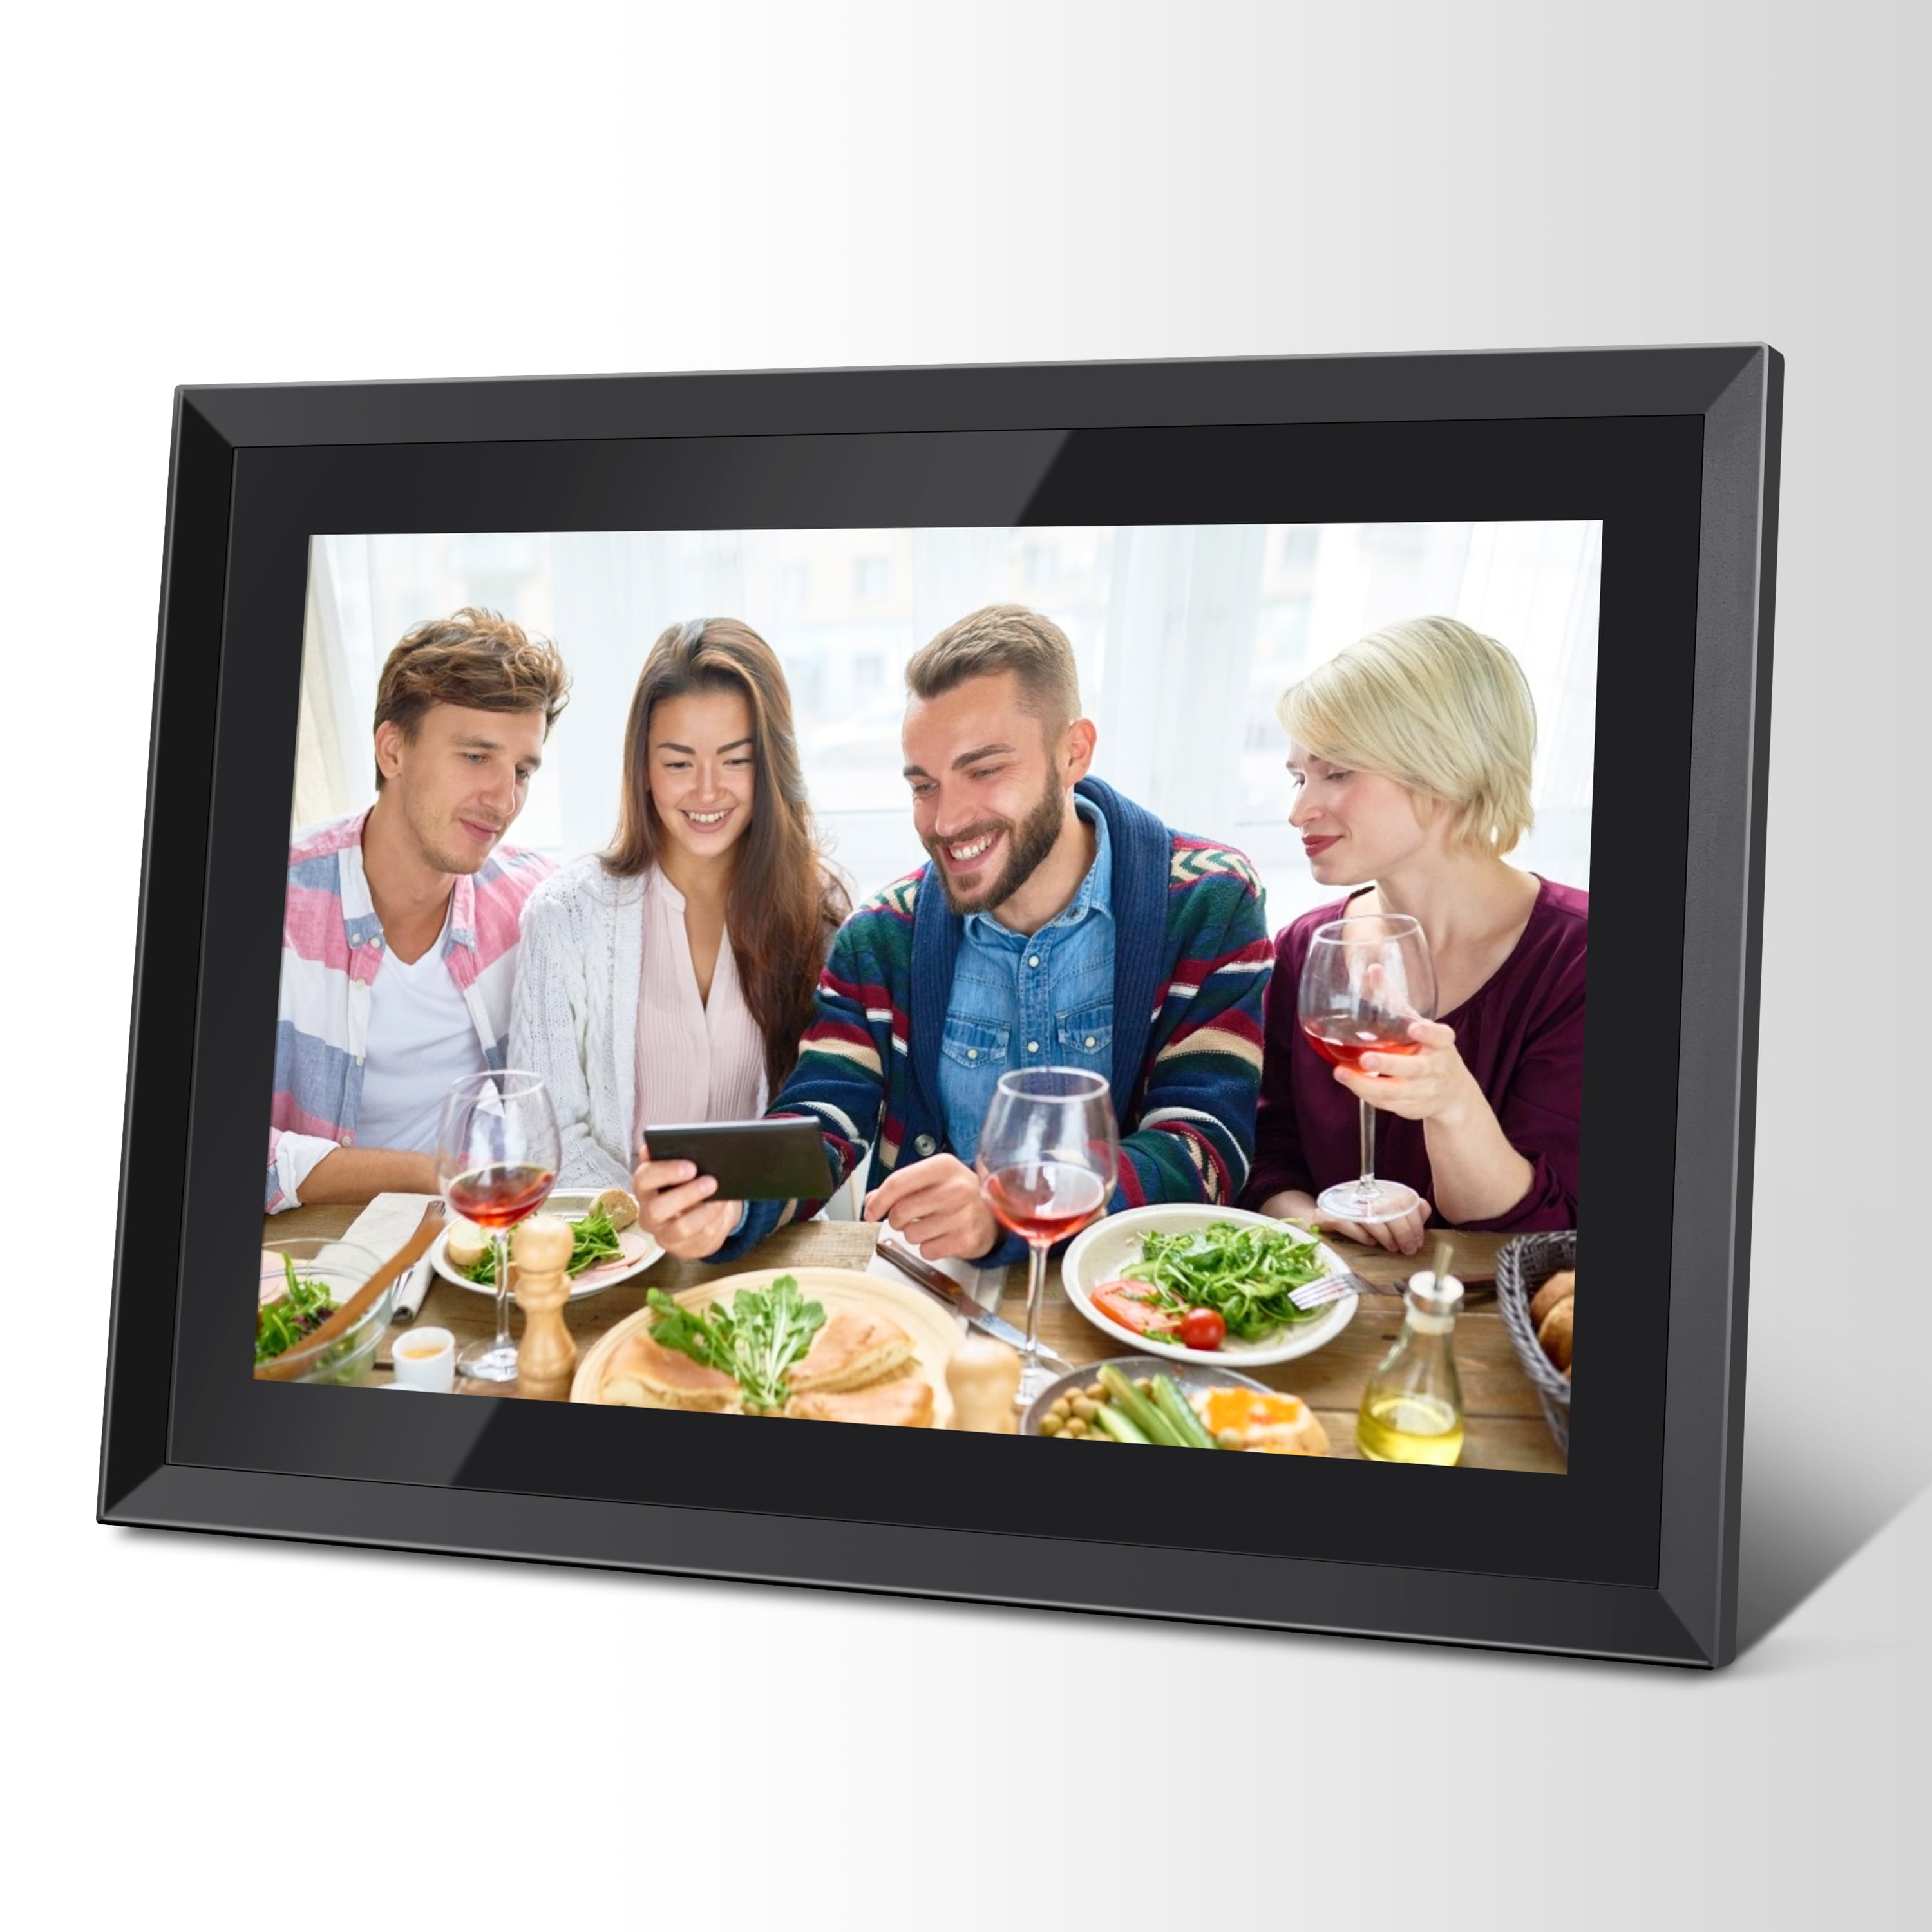 Instantly Sharing Moments IPS LCD Panel Built in 8GB Memory Portrait&Landscape Feelcare 7 Inch Smart WiFi Digital Picture Frame with Touch Screen Wall-Mountable White 